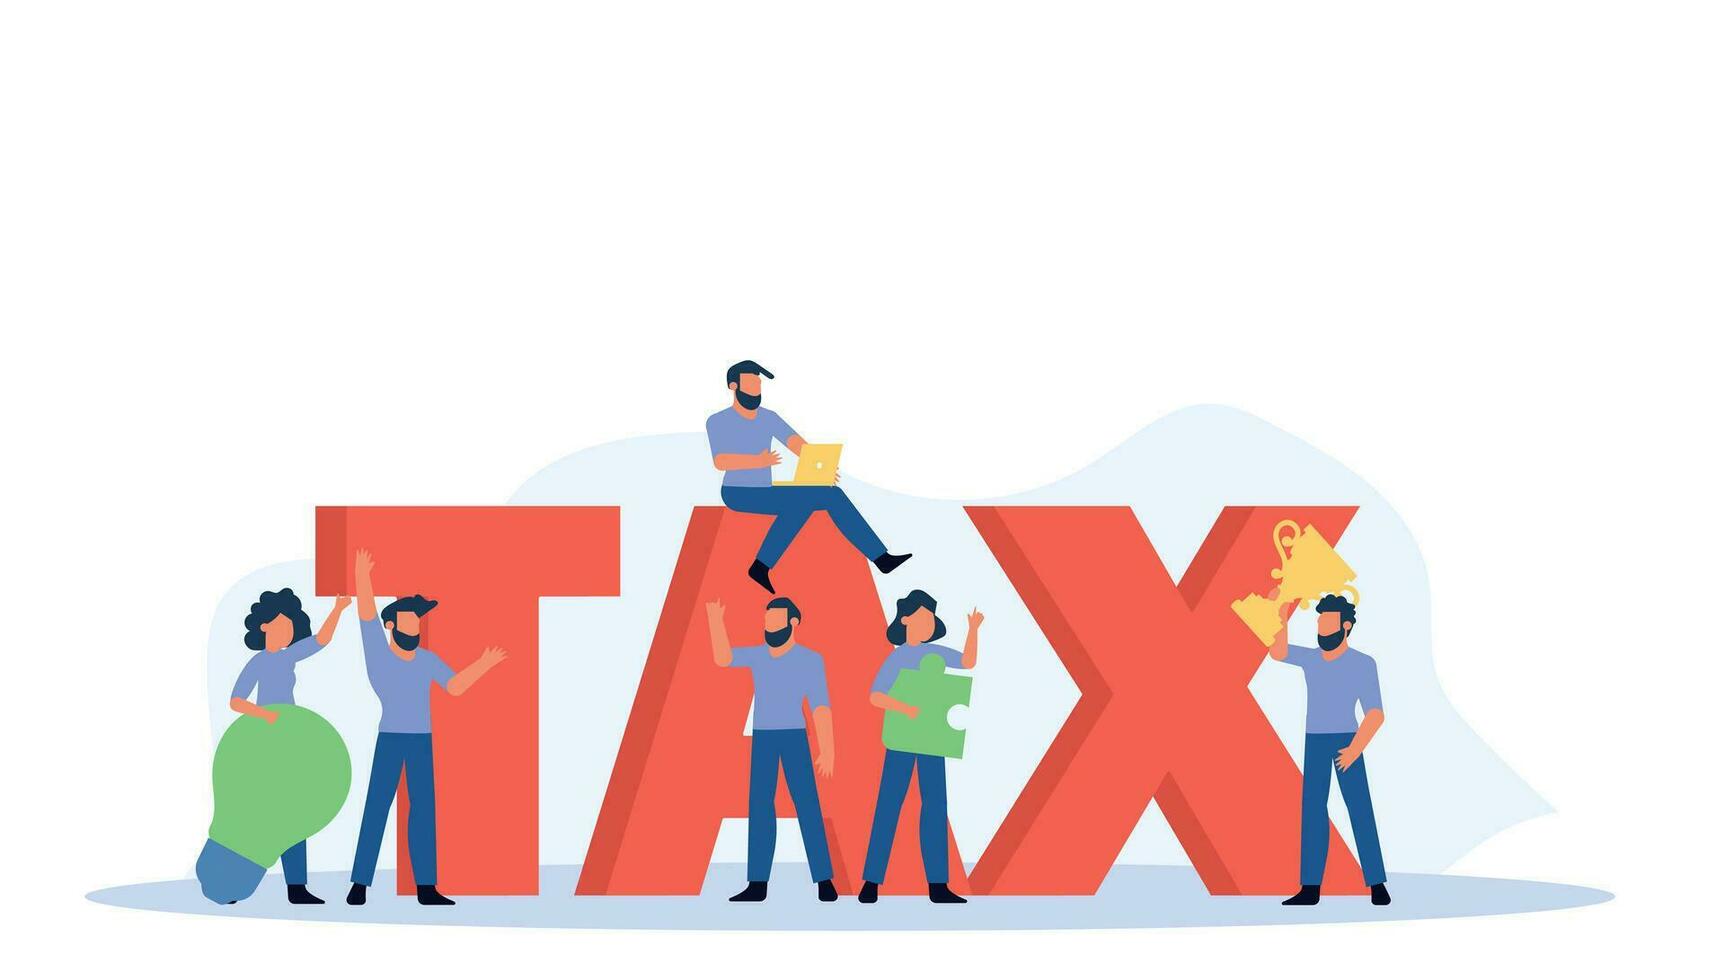 Creative flat vector illustration with businessman and his team working together on laptop to manage their business finances, including taxes, accounting, banking, payroll, and invoicing.